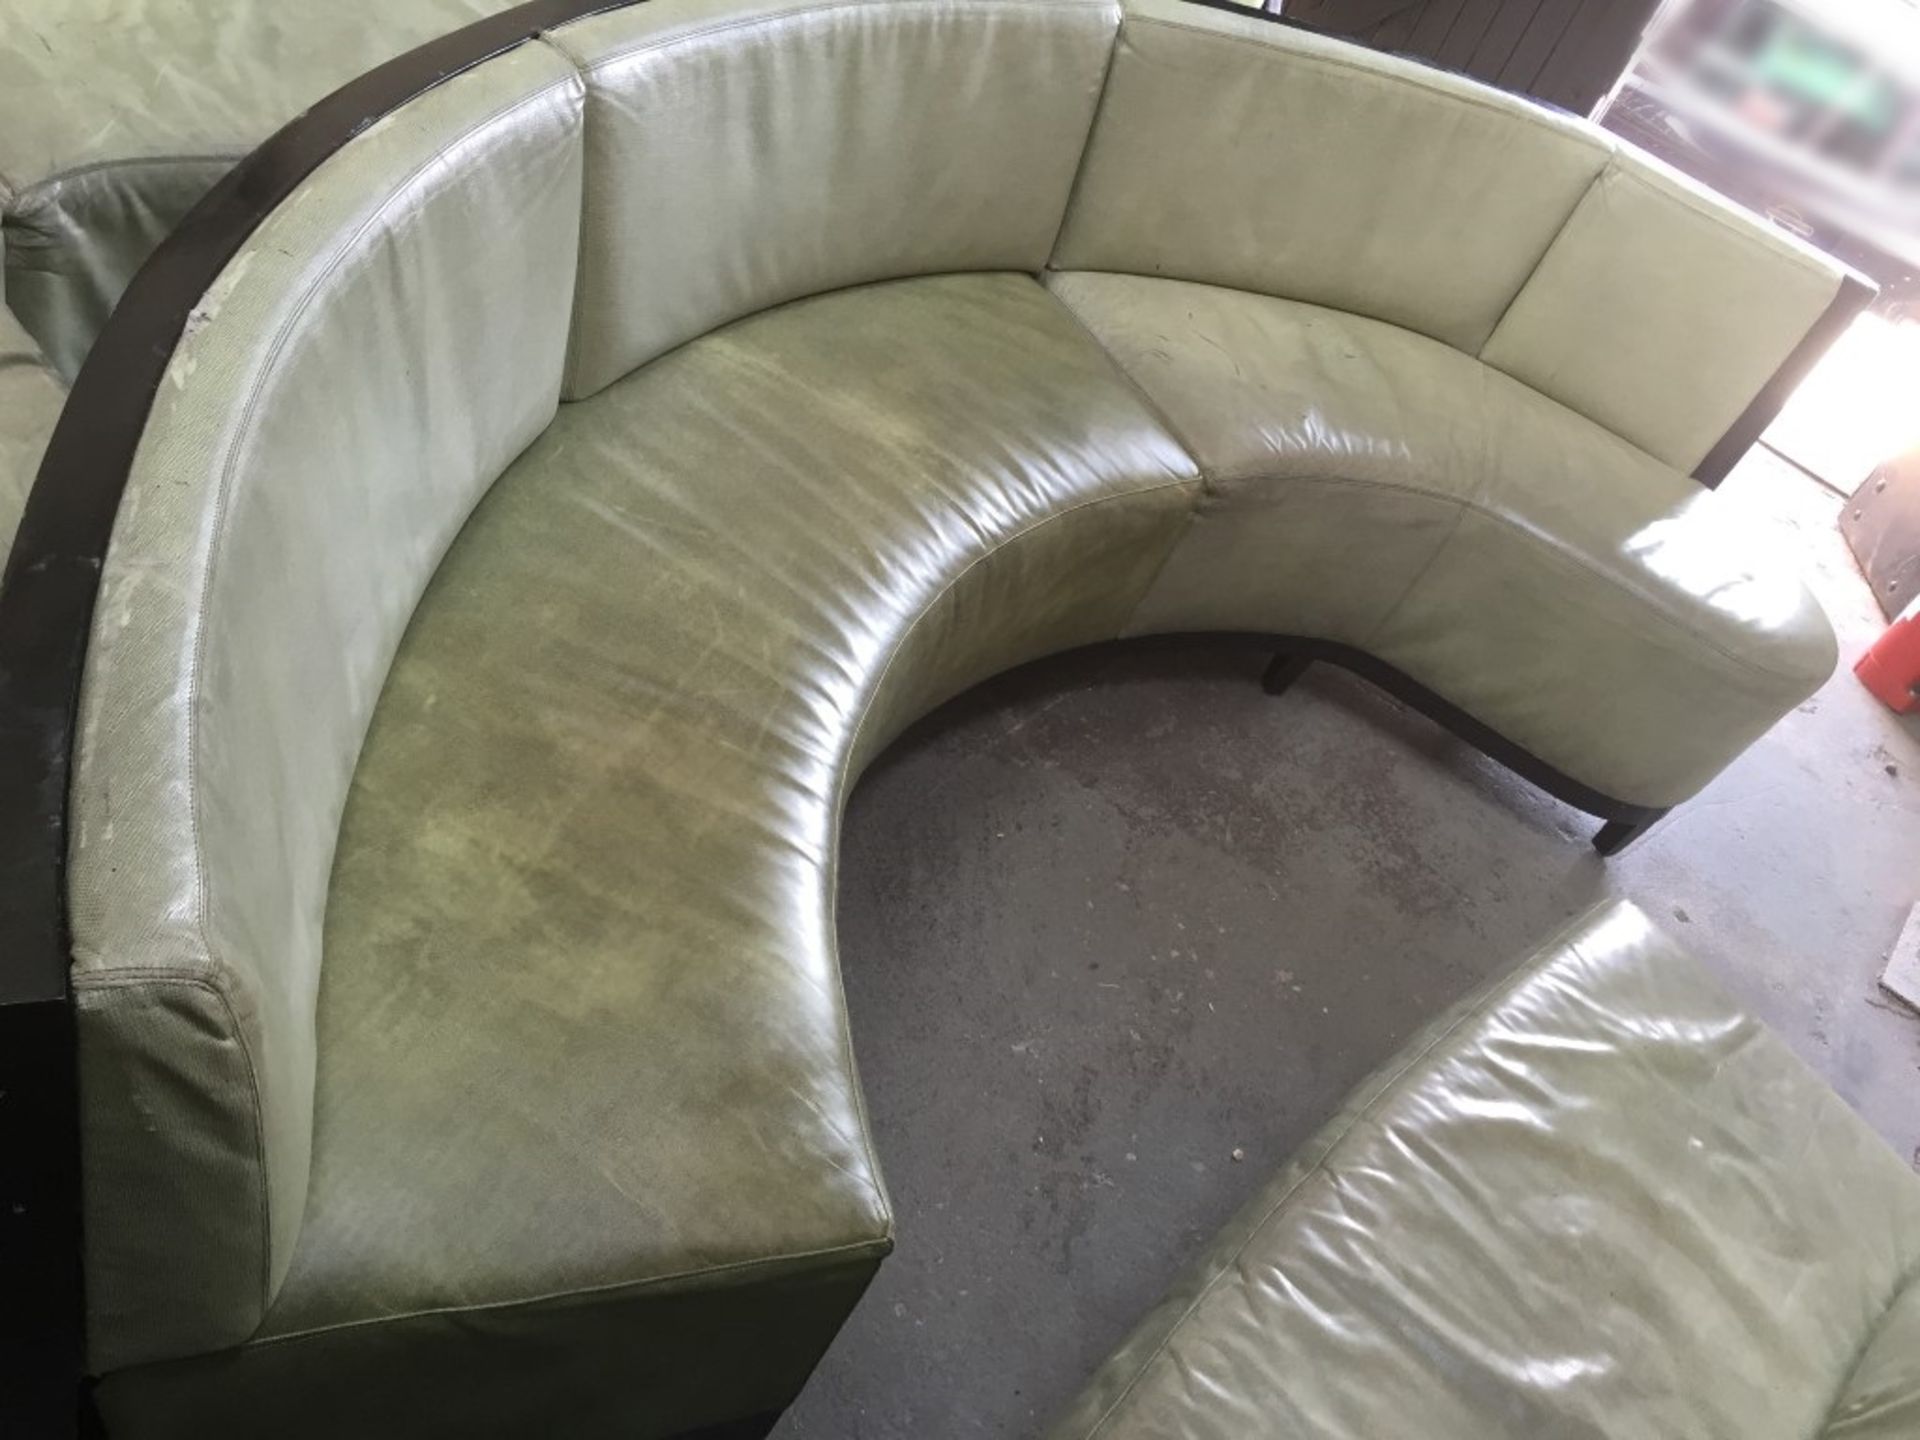 1 x Luxury Upholstered Curved Seating Area - Recently Removed From Nobu - Dimensions: W285 x D62cm x - Image 11 of 23